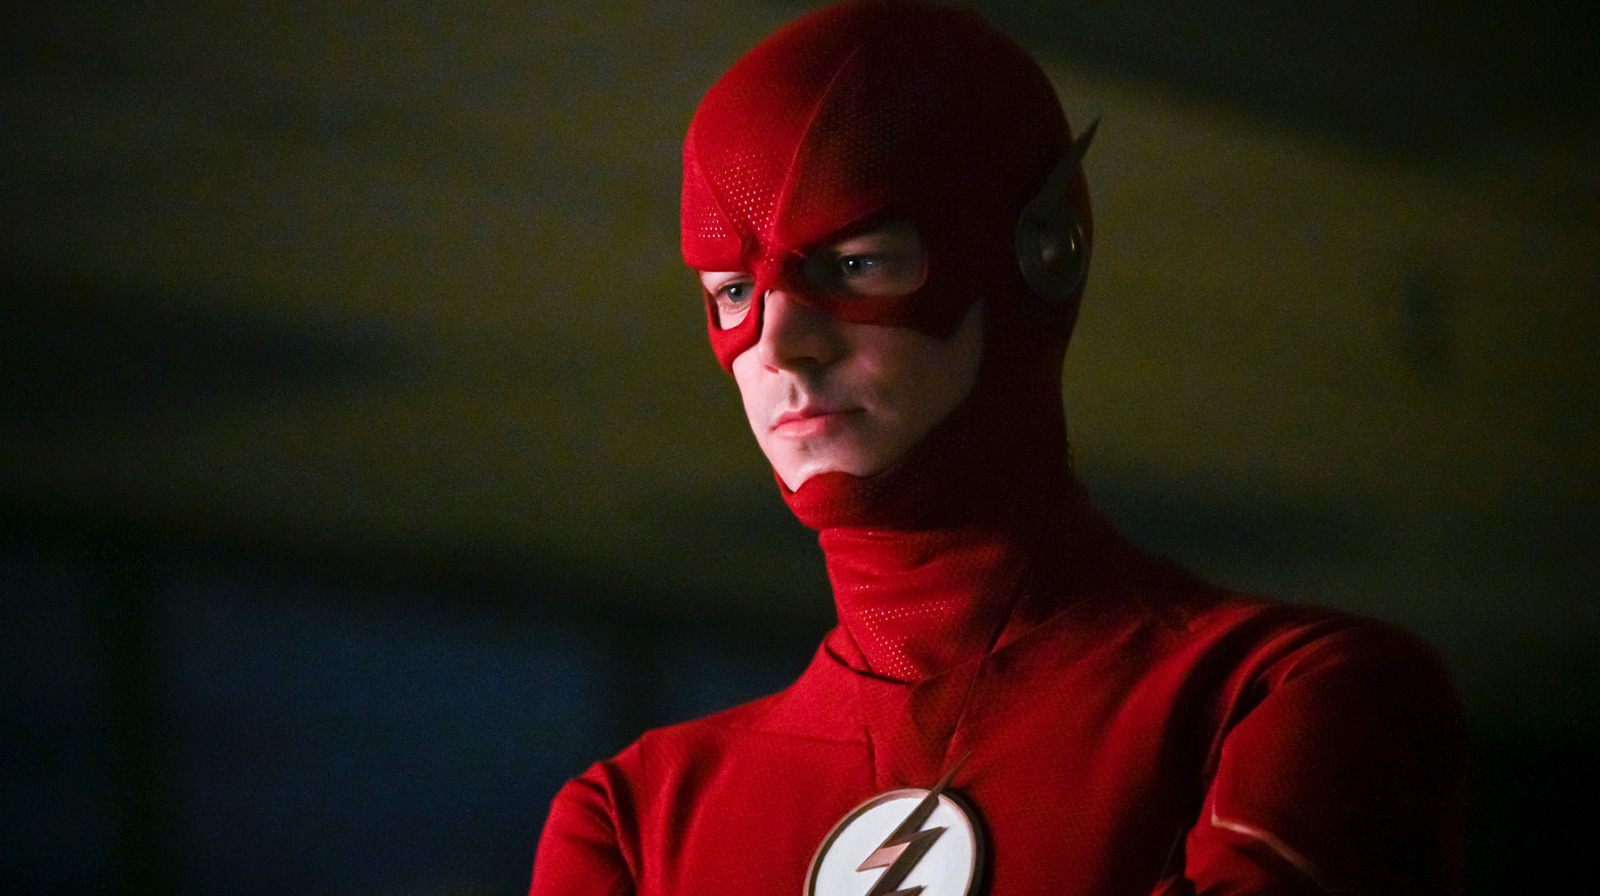 The Flash Has Just Gotten Probably the Best Superhero Movie Trailer Ever